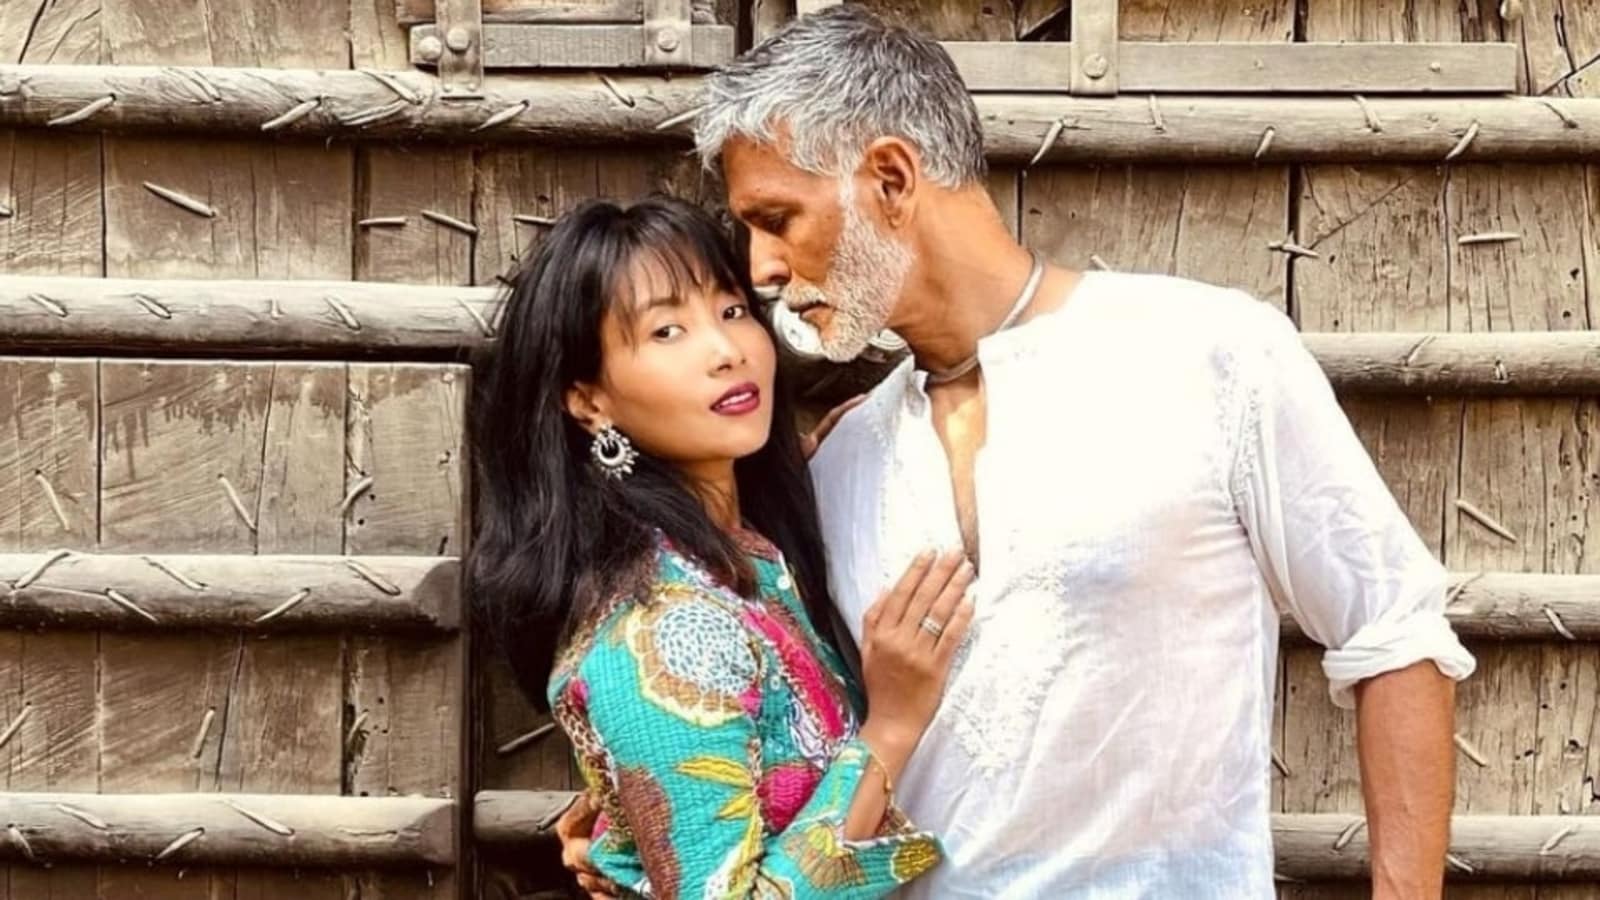 Milind Soman does push-ups with ‘supportive wife’ sitting on his back in epic video: Ankita Konwar reacts